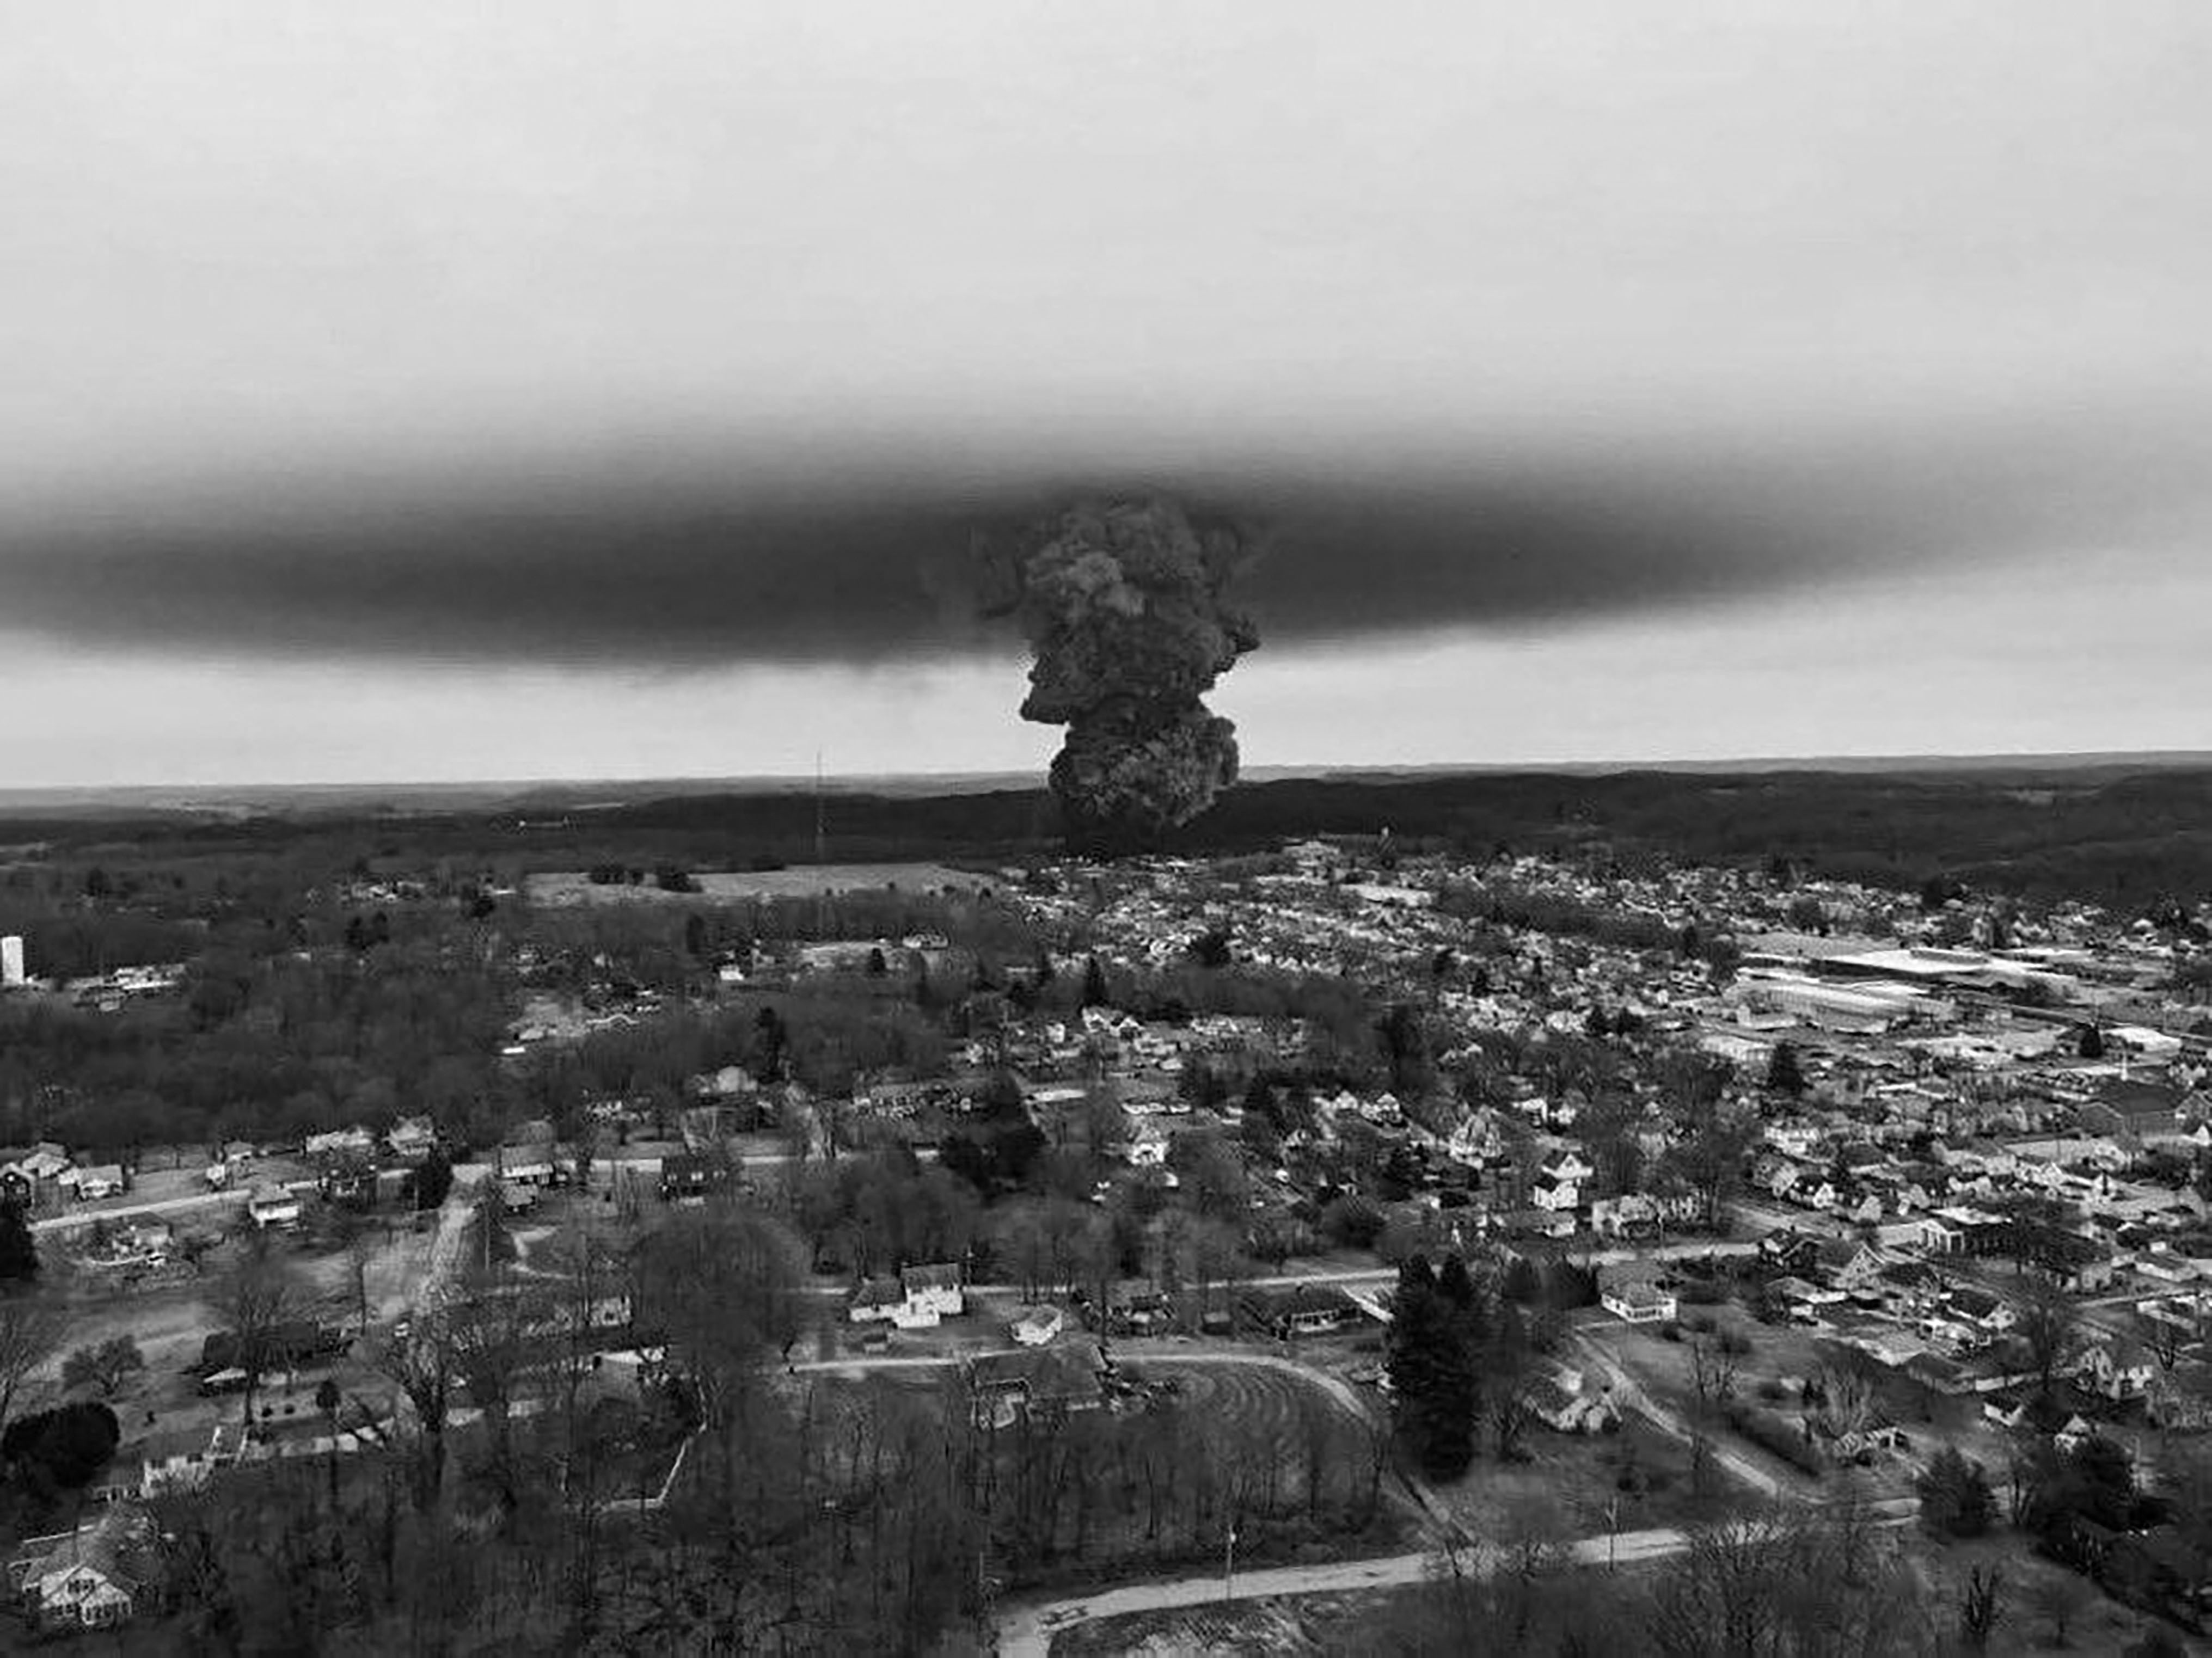 Large black cloud of toxic chemicals as seen by a drone above the town of East Palestine, Ohio.